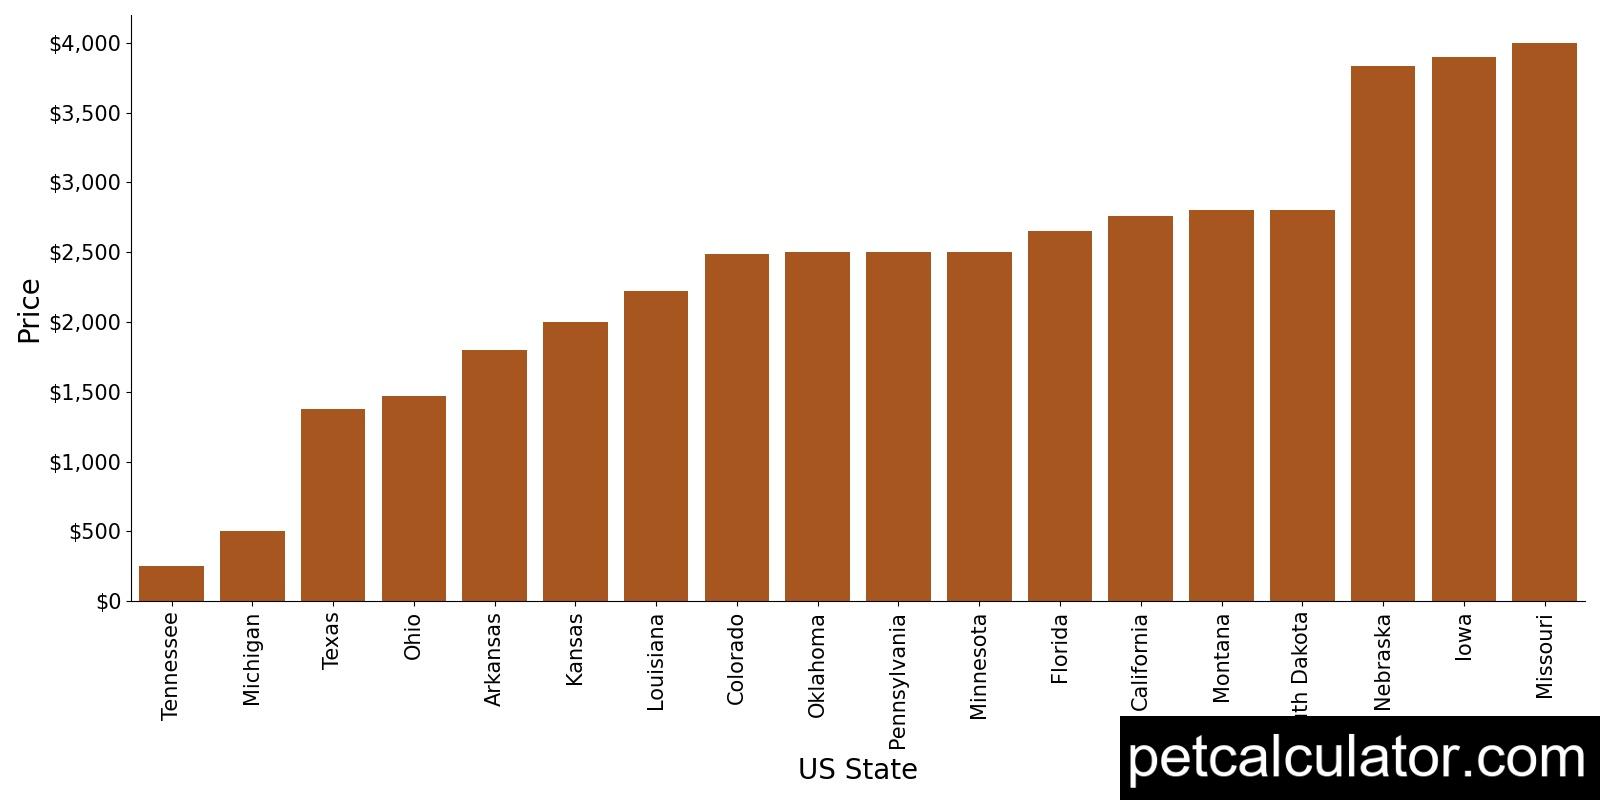 Price of Miniature Bull Terrier by US State 